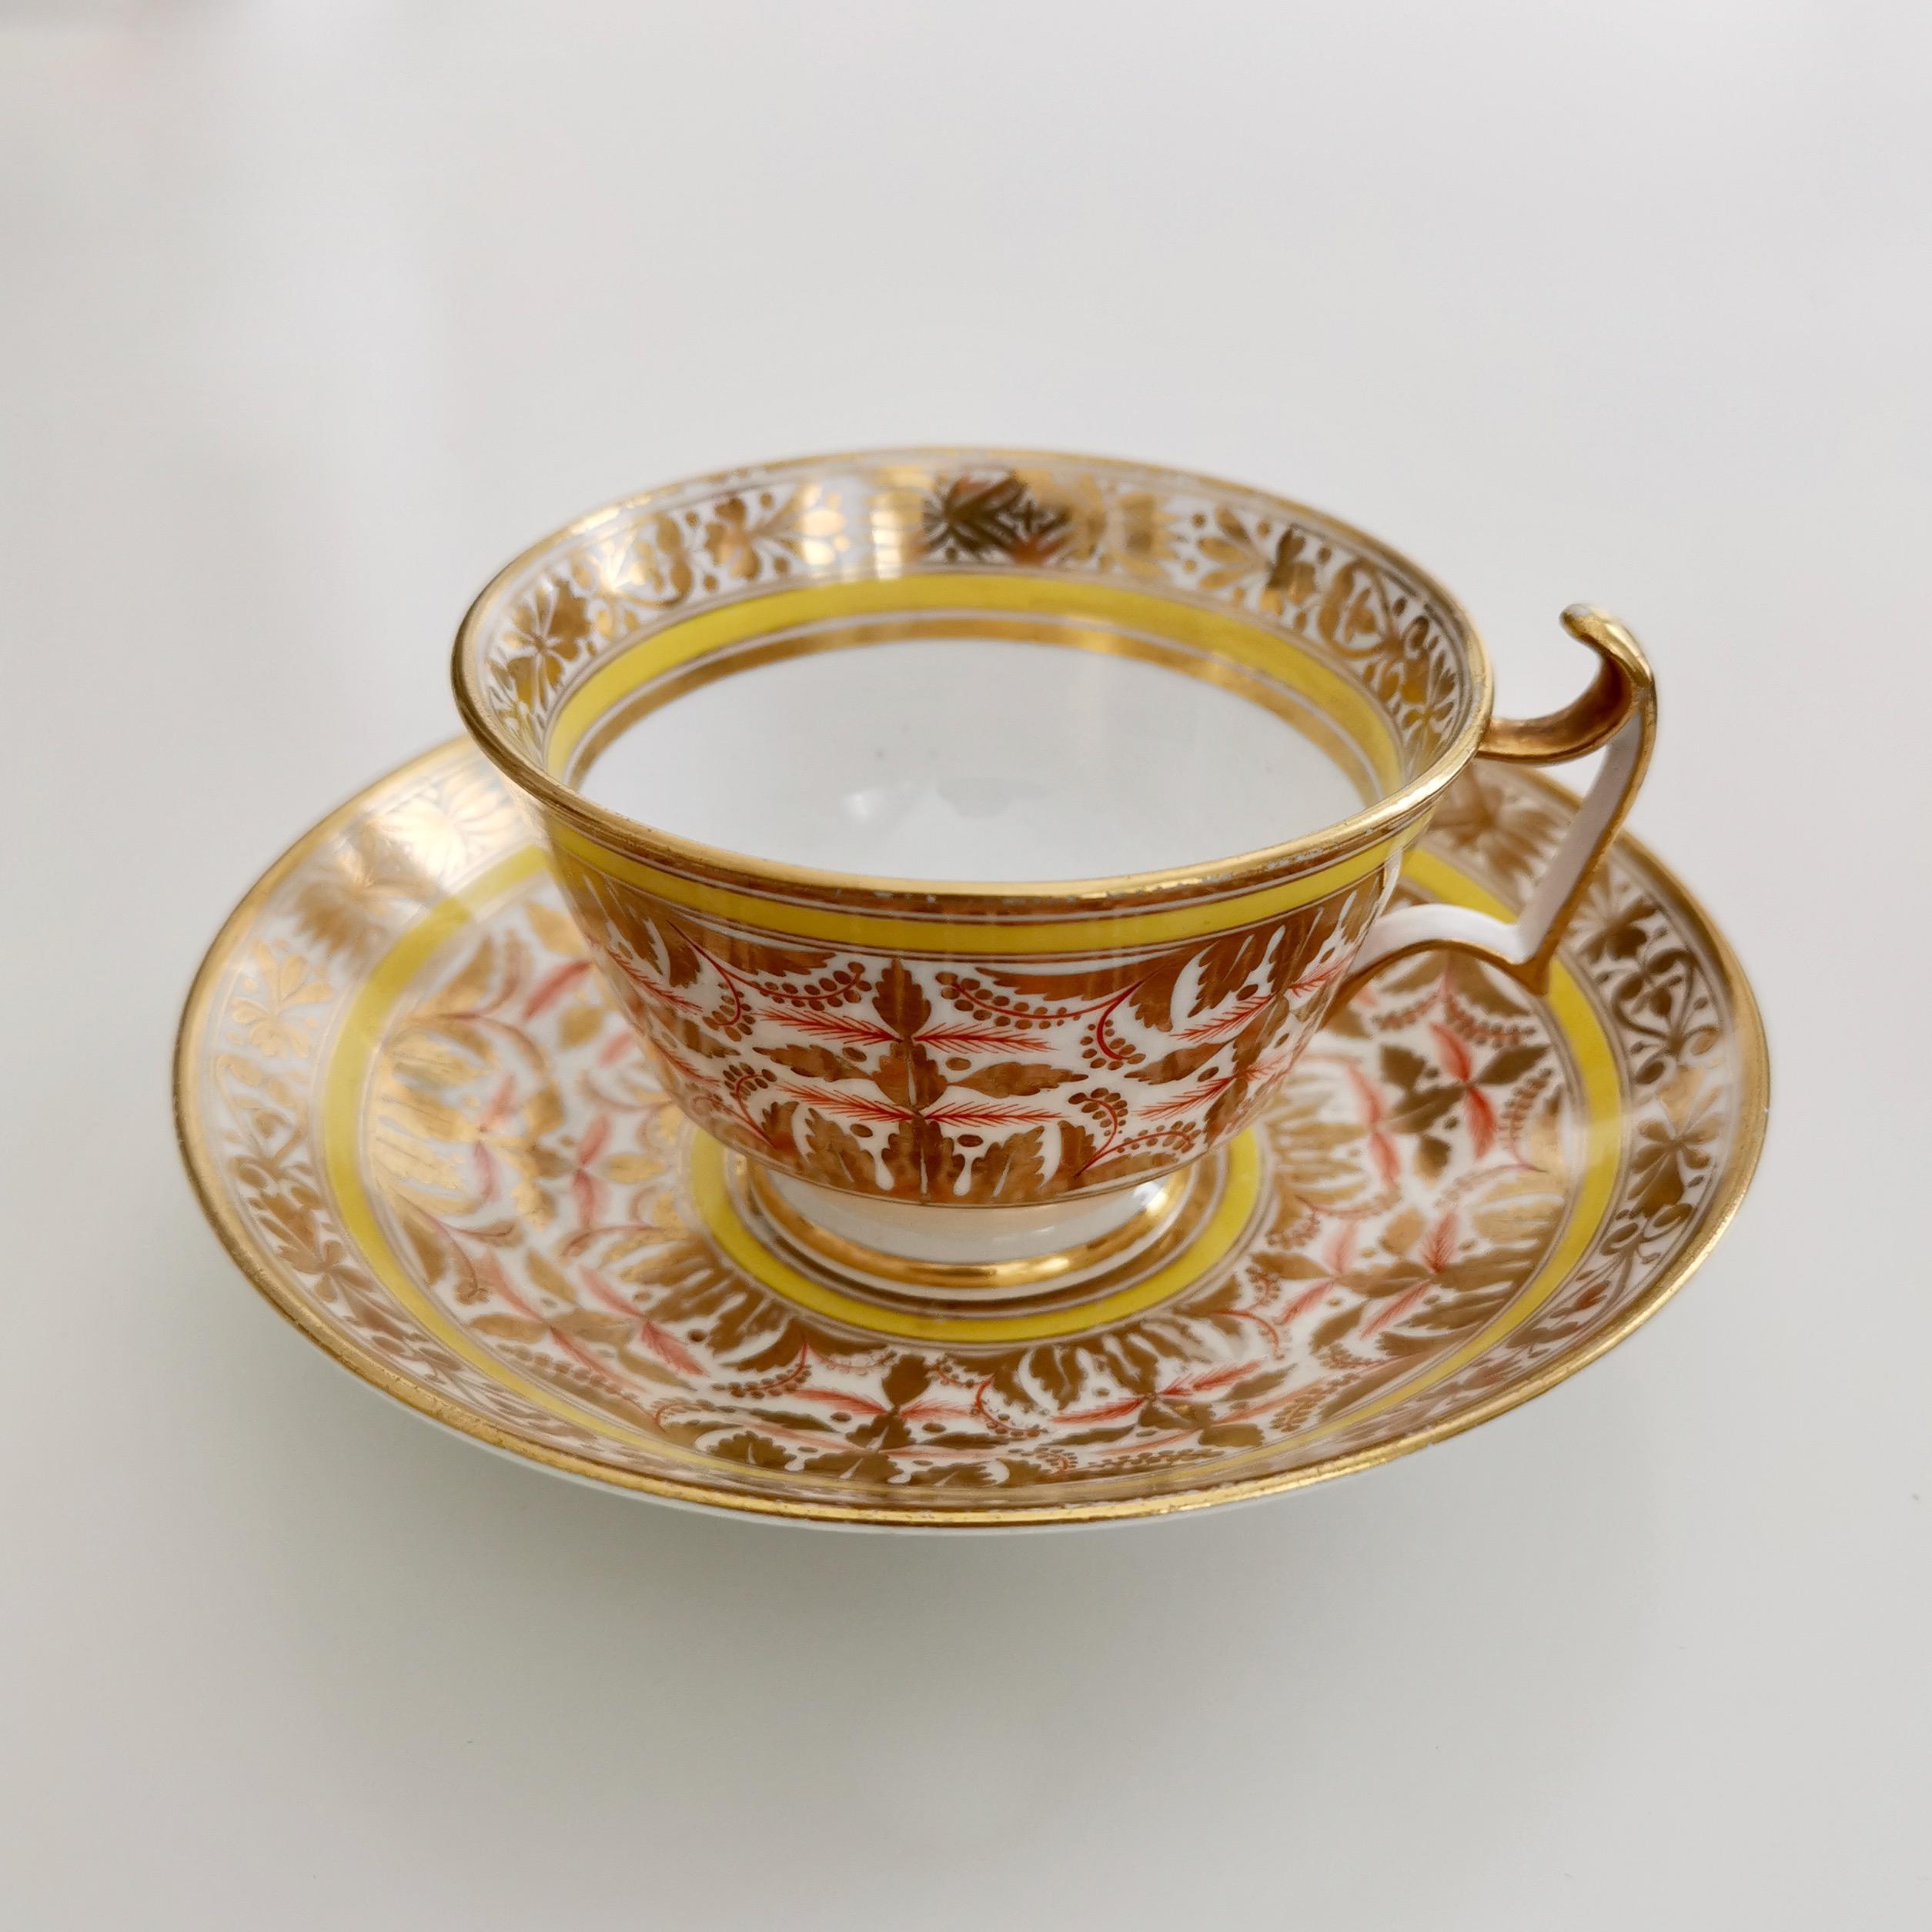 English Spode Porcelain Teacup Set, Gilt, Yellow and Red Regency Pattern, circa 1815